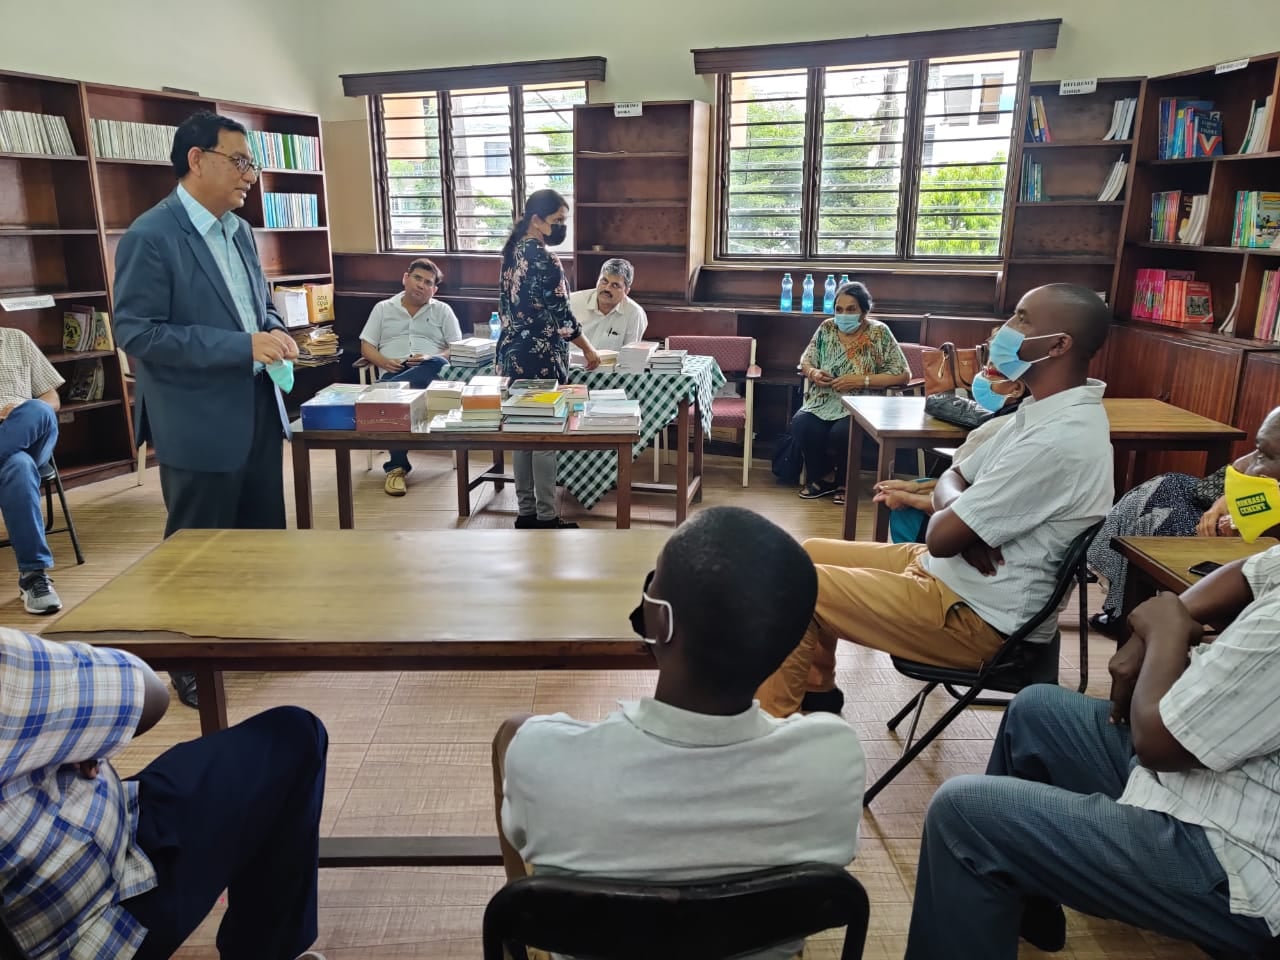 Presentation of books on India's heritage and literary masterpieces for setting up India Corner at Arya Samaj School in Mombasa. Chairman, Trustees, Head Master, Teachers and Students of Arya Samaj attended the presentation ceremony.